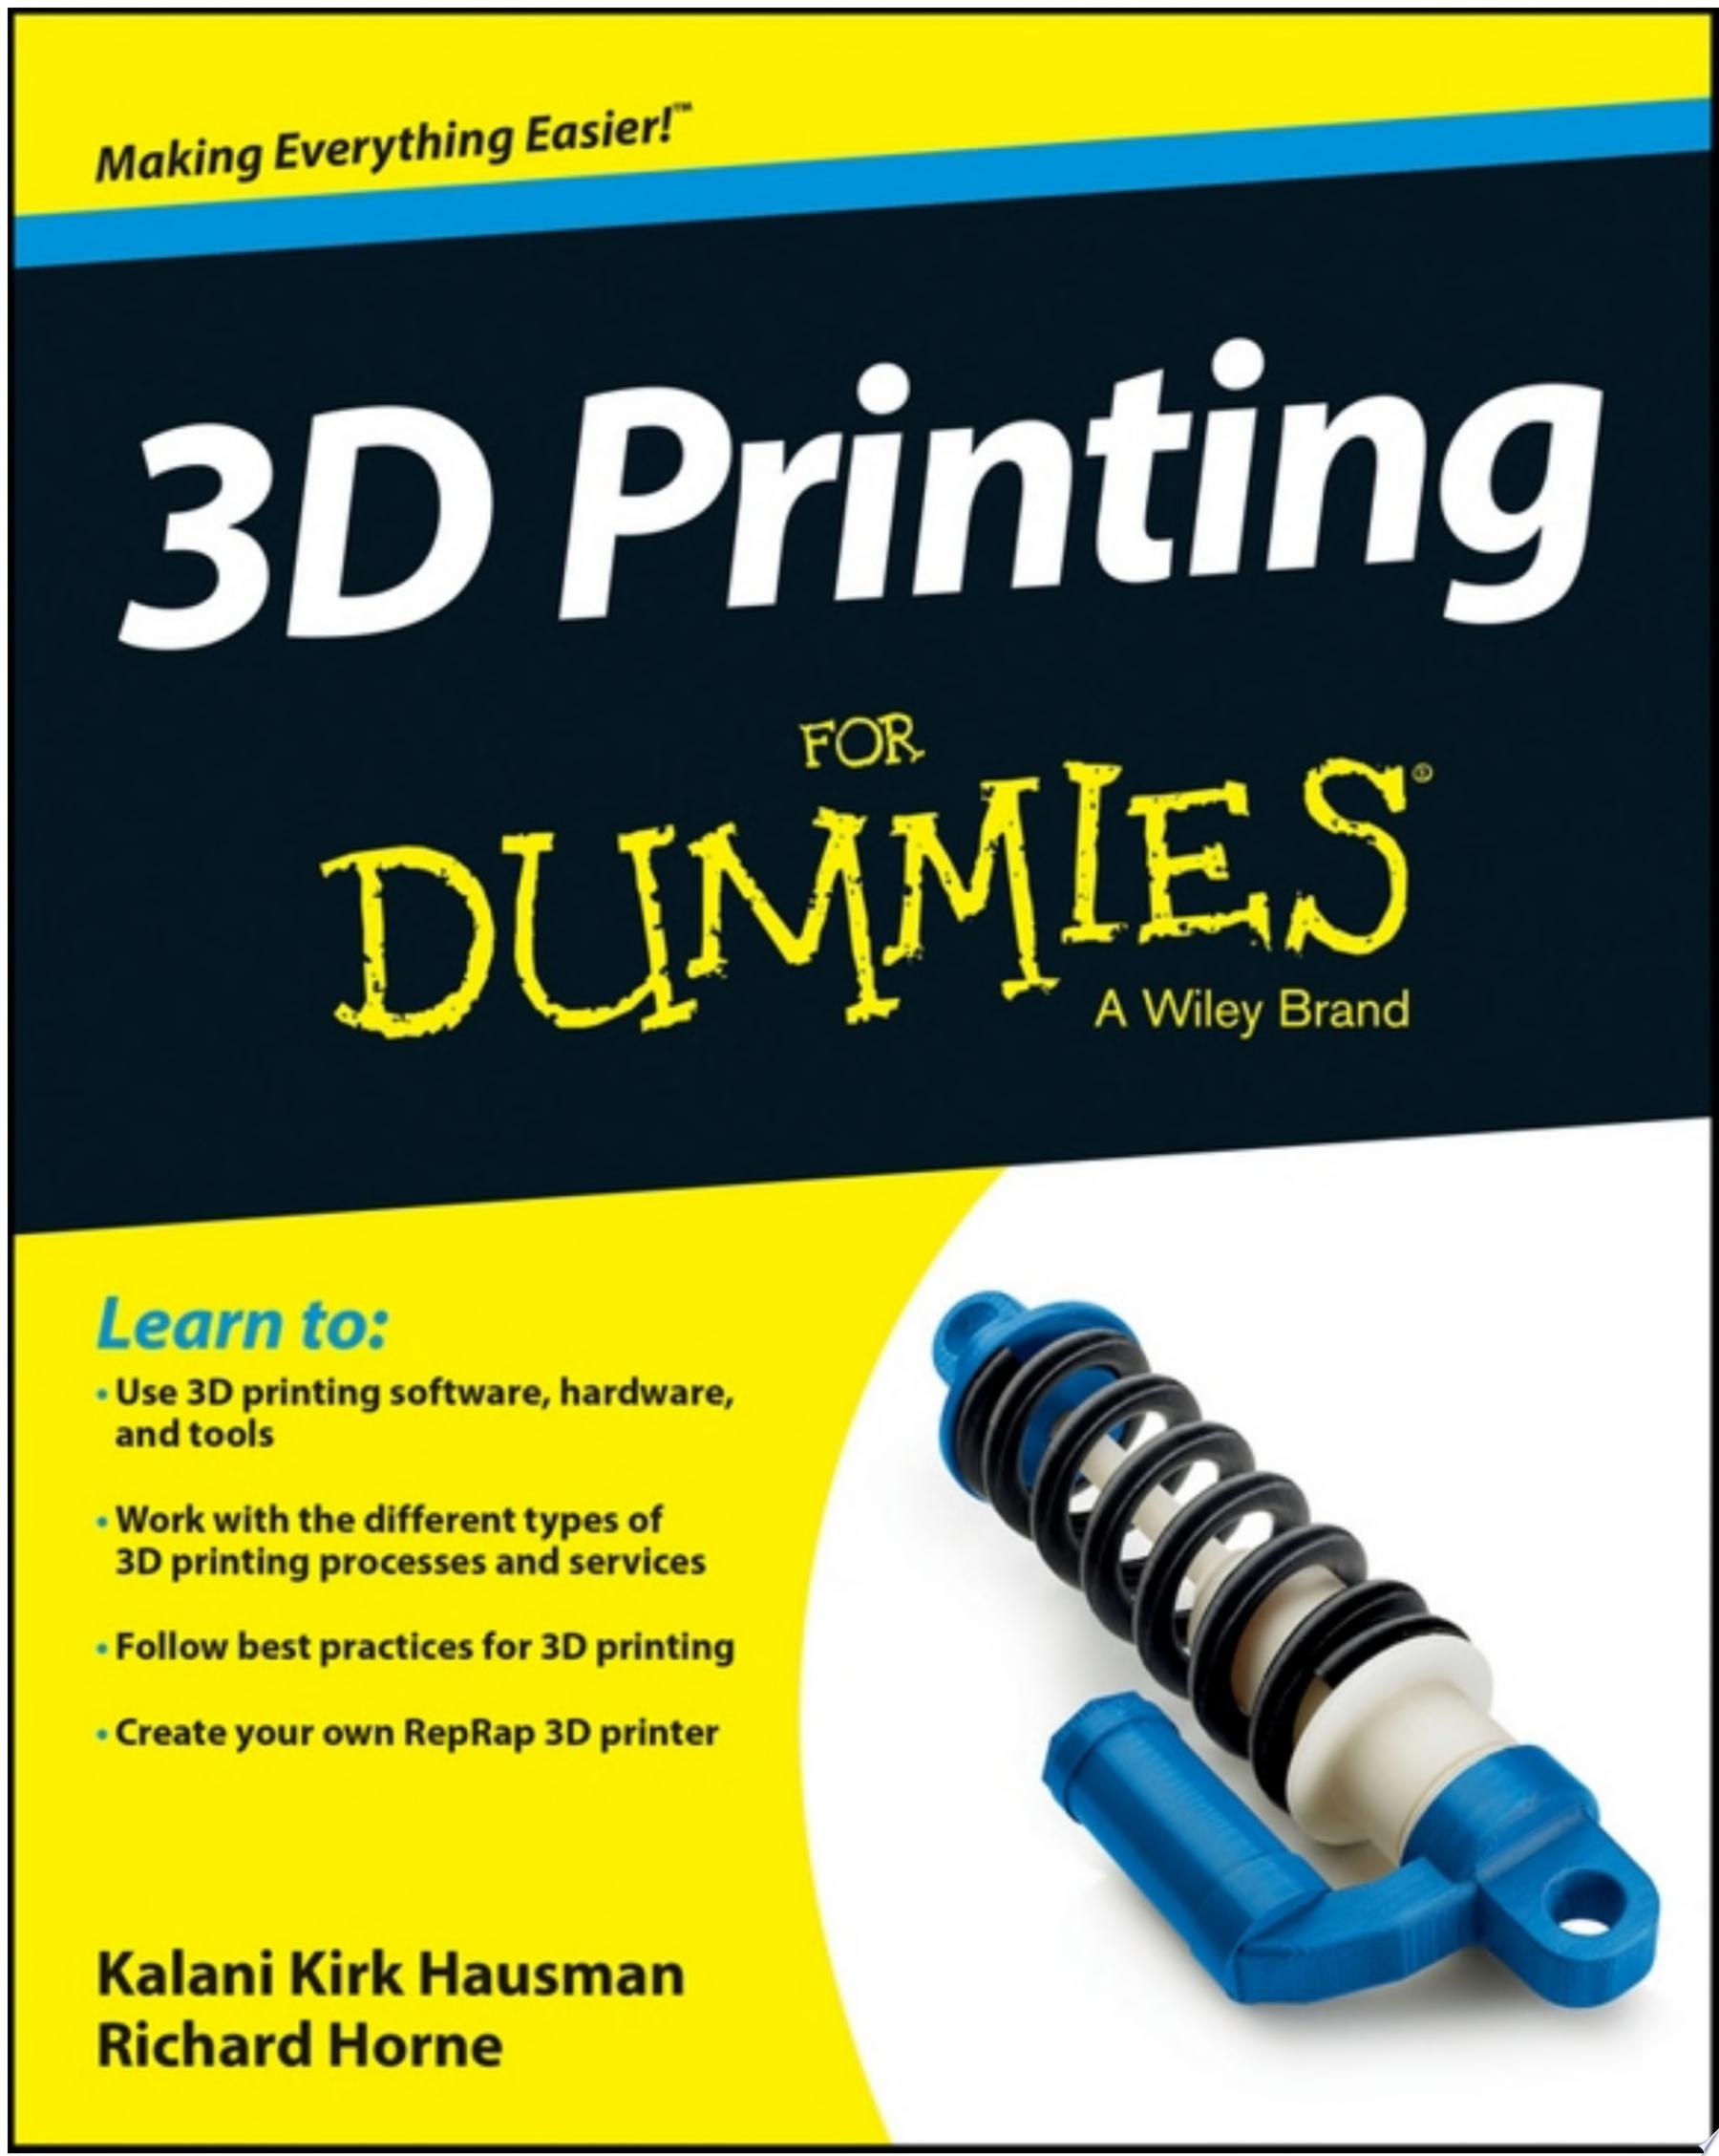 Image for "3D Printing For Dummies"